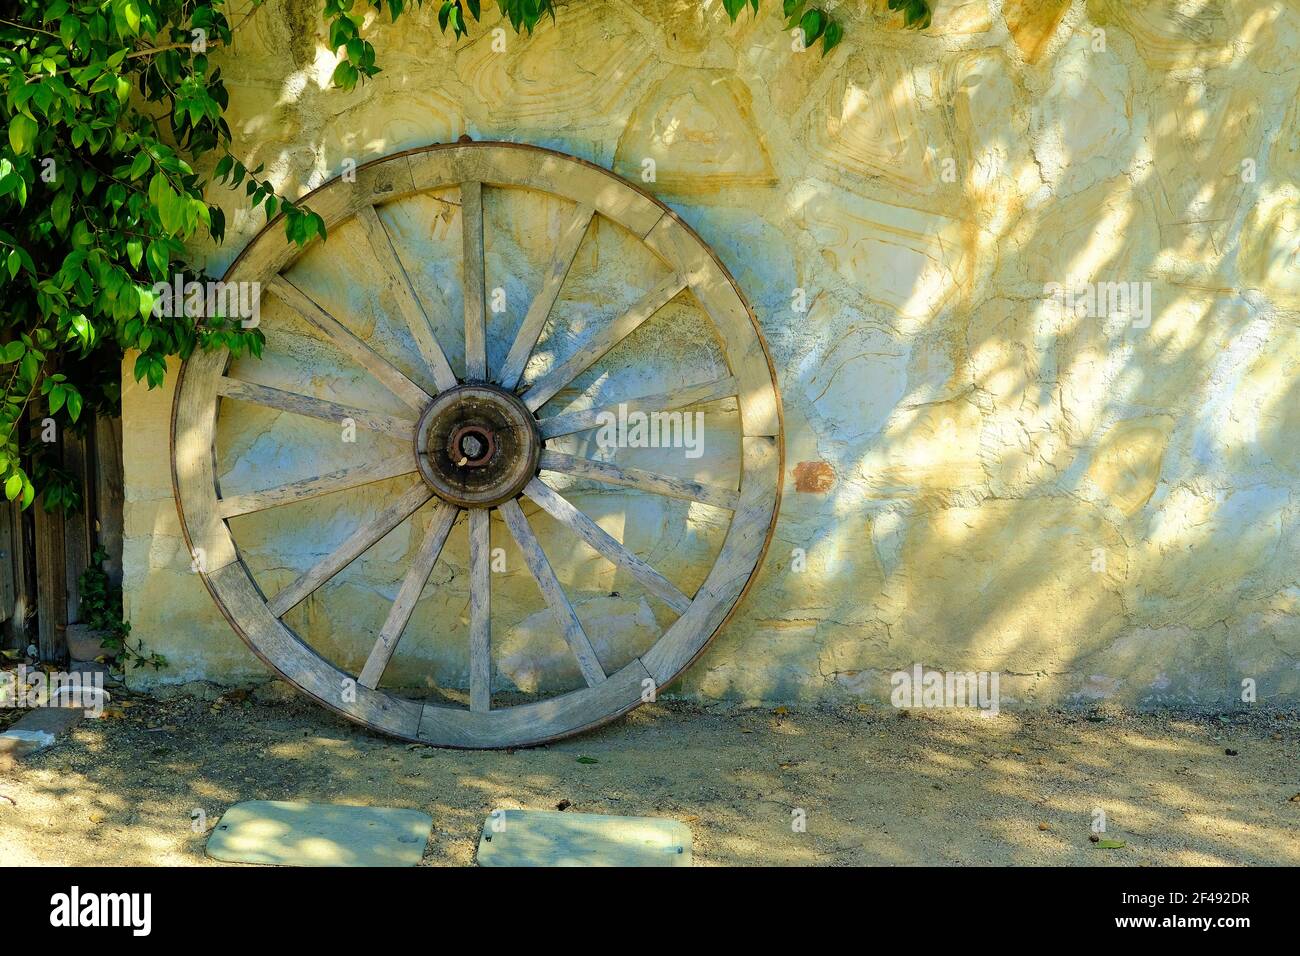 Wagon wheel leaning on a rustic wall; western, cowboy country decor and style. Stock Photo